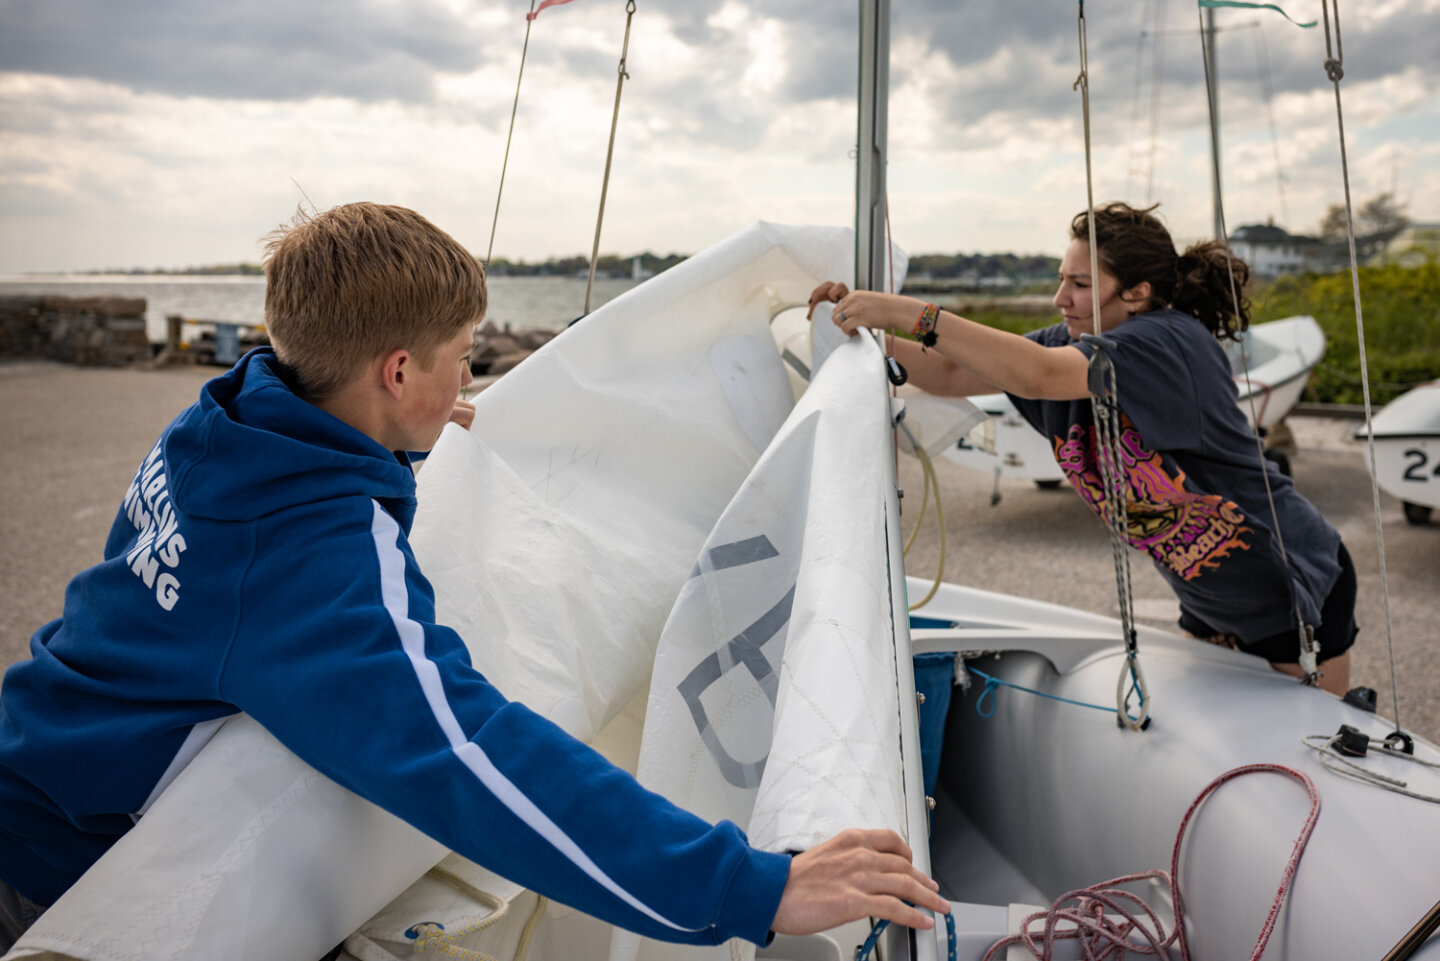 Williams sailing students attach the sail to their boat at the marina